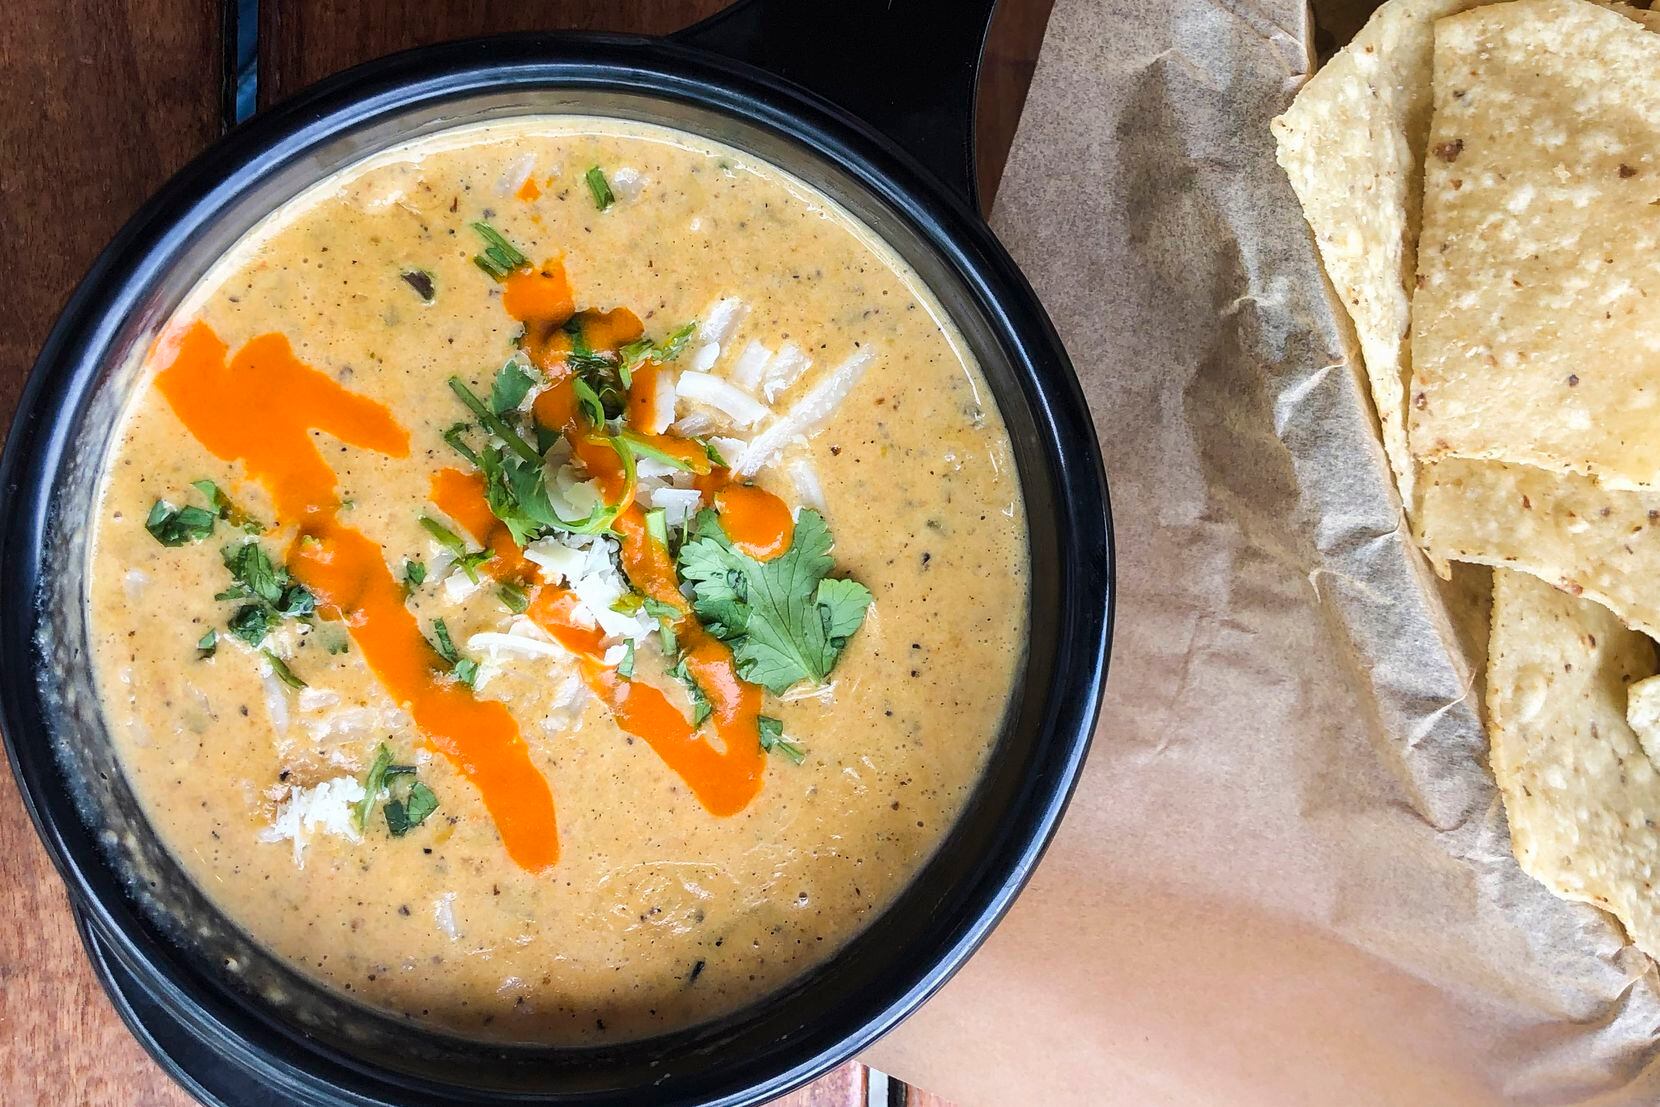 Torchy’s Tacos' queso sold in grocery stores in Texas